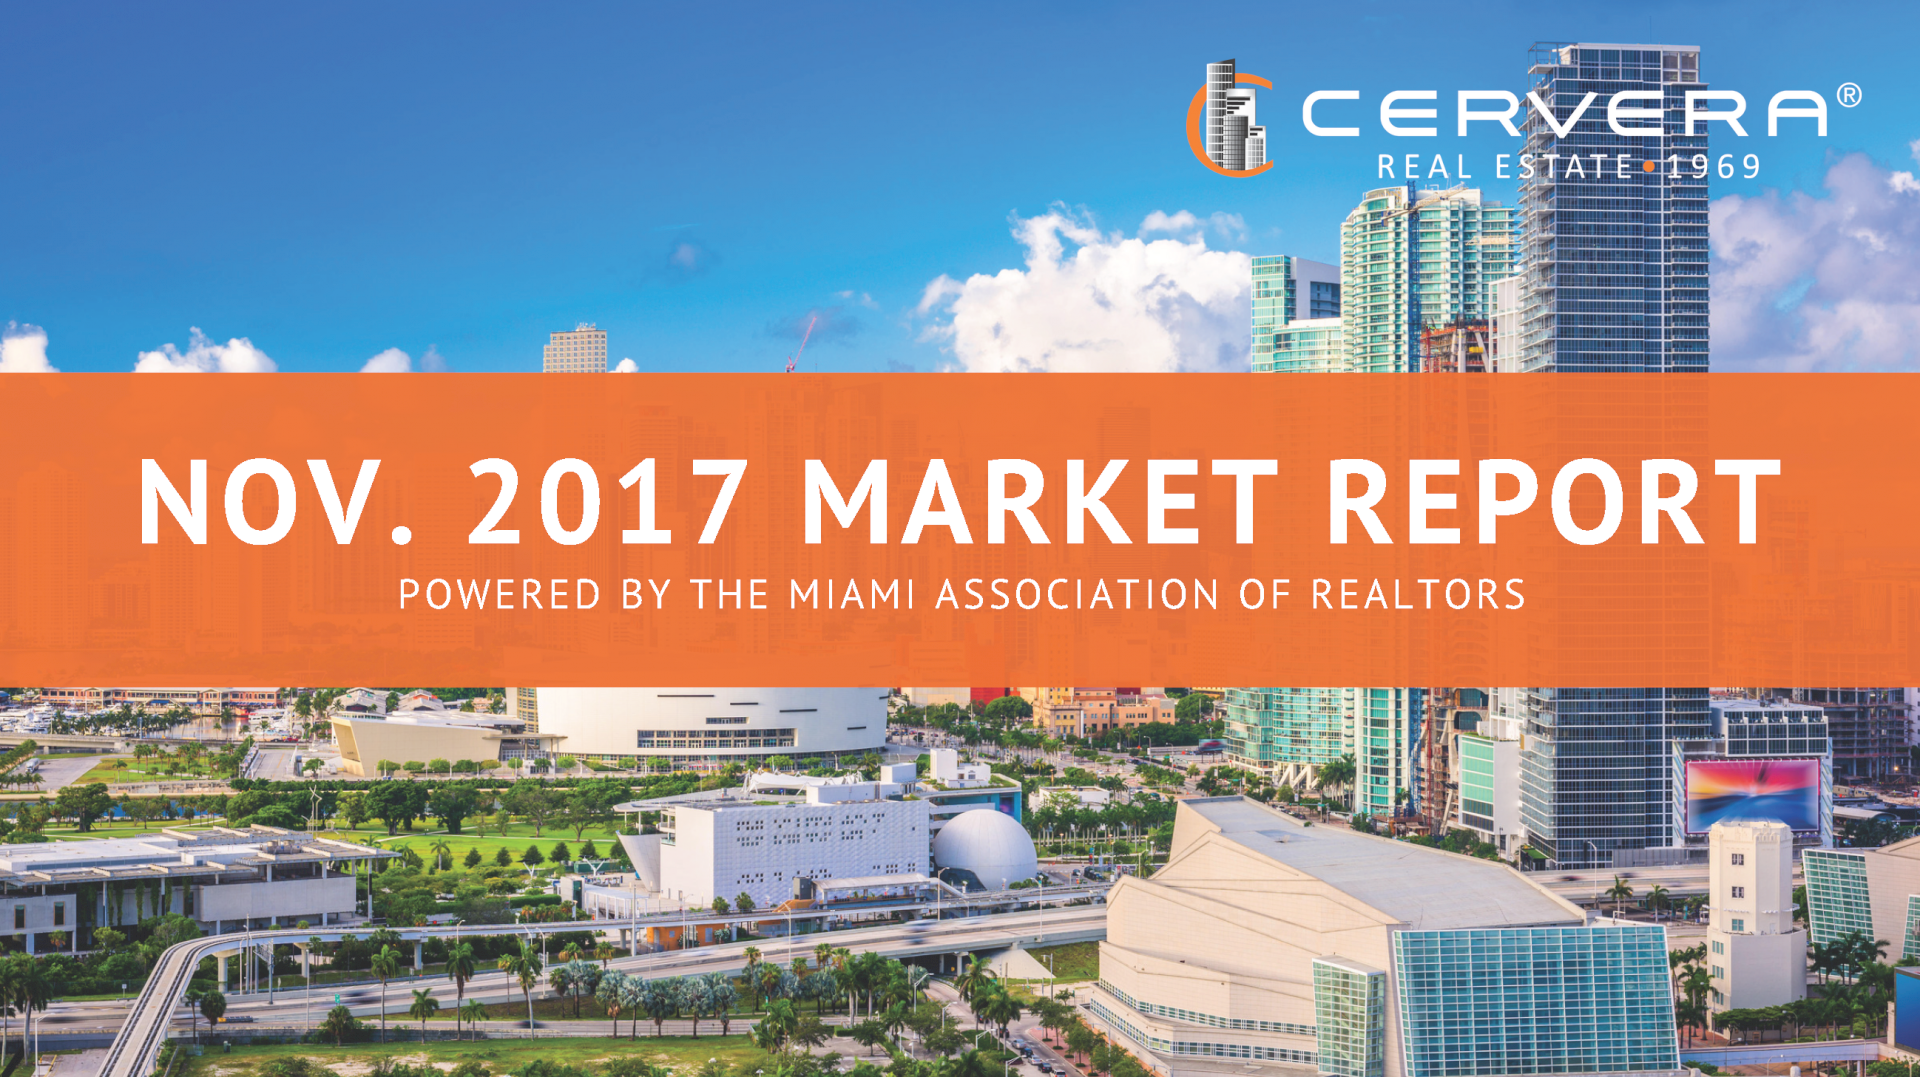 November 2017 Market Report: Rise in Mid-market Miami Home Sales & Median Prices for All Properties